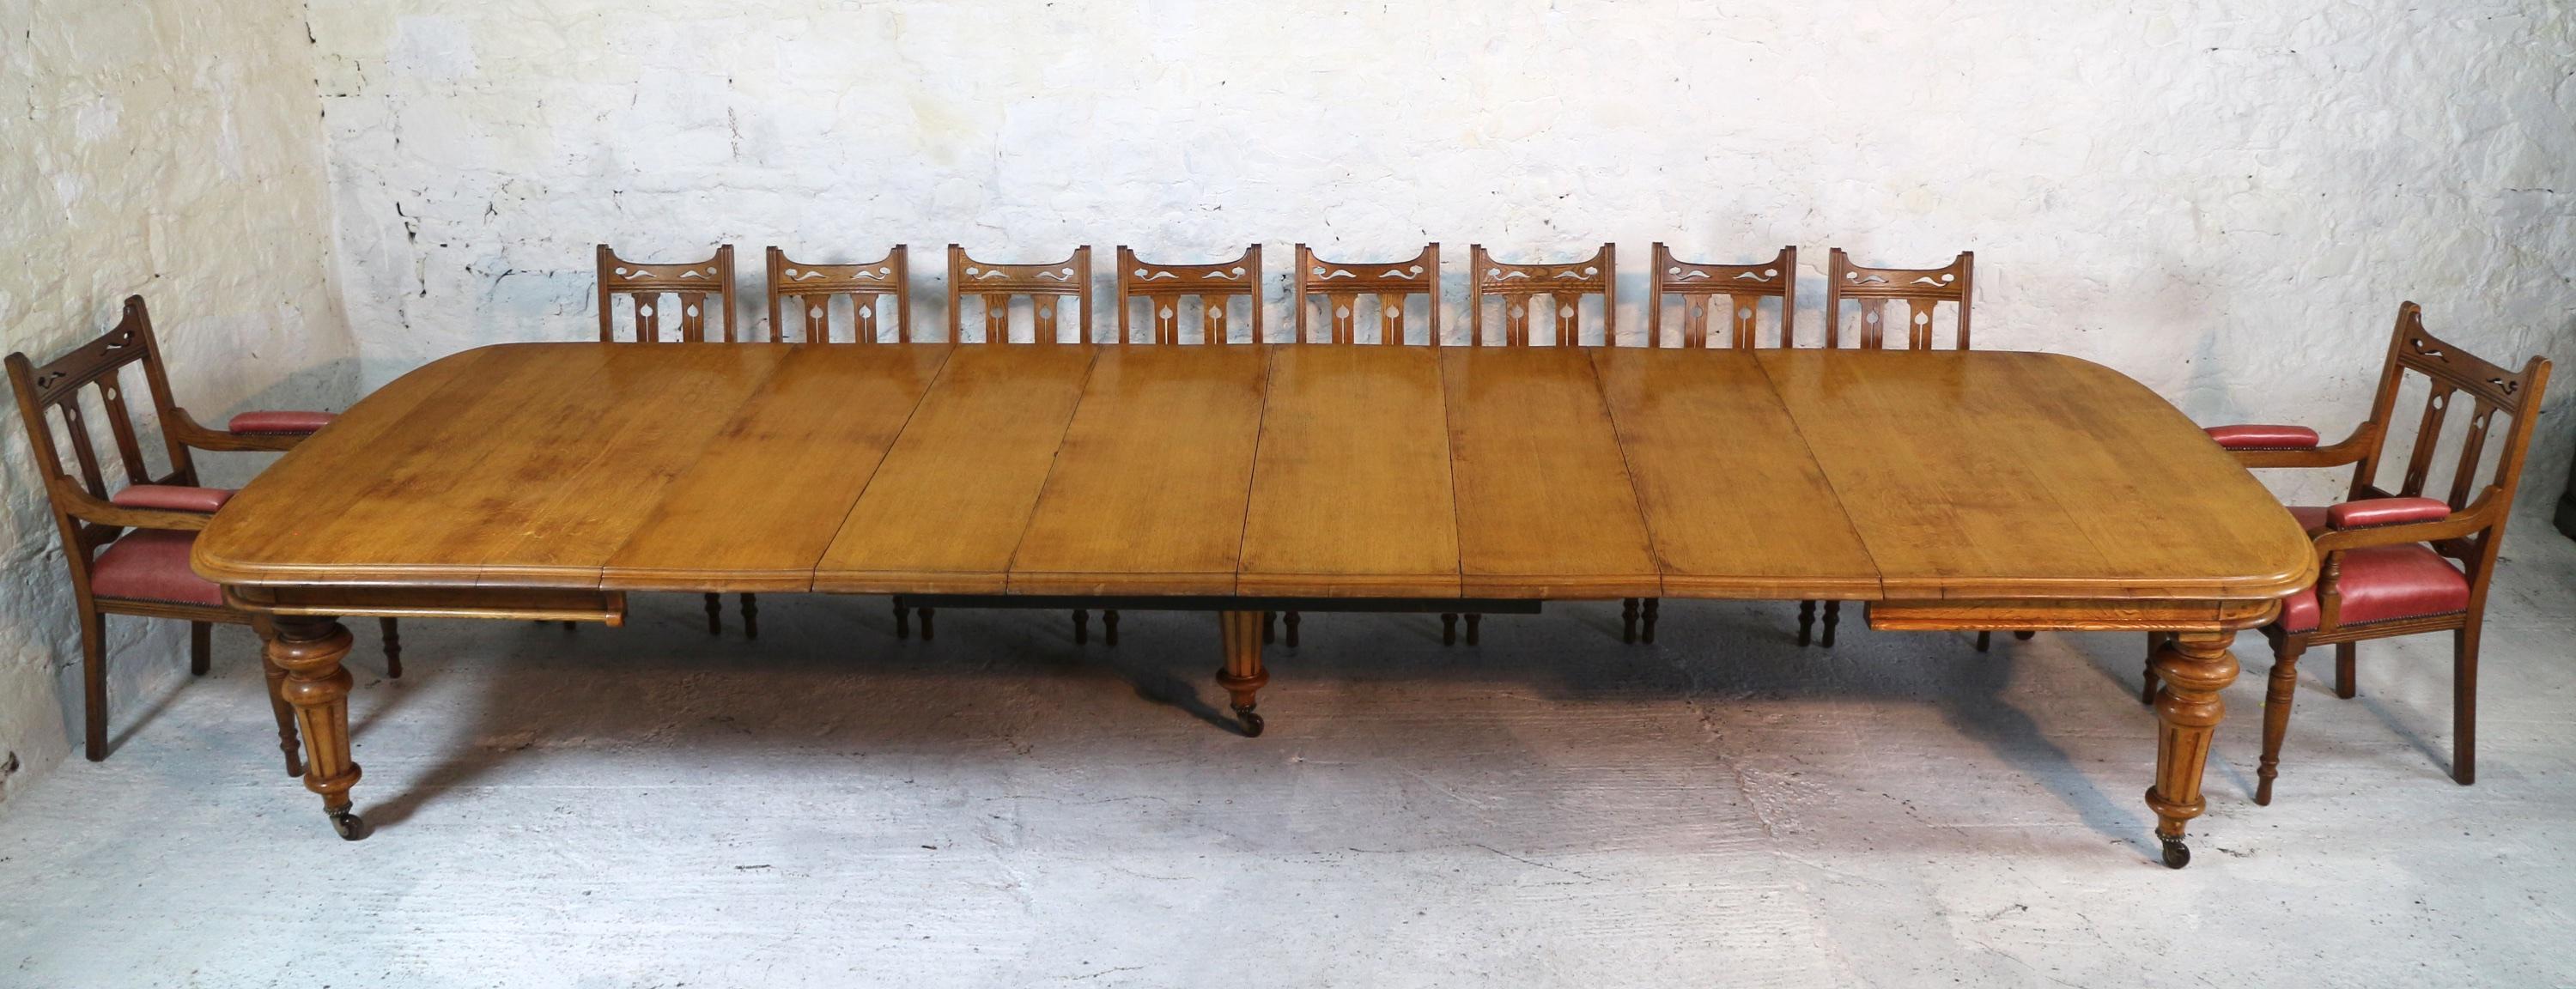 double wide dining table